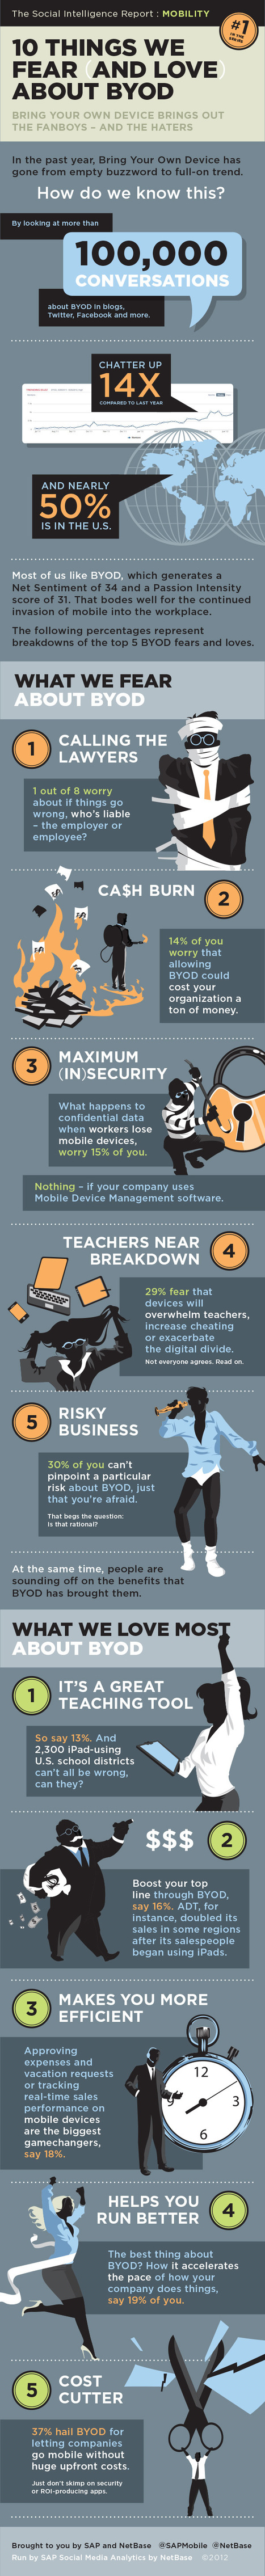 Infographic: The Ten Things We Fear (And Love) About BYOD | omnia mea mecum fero | Scoop.it